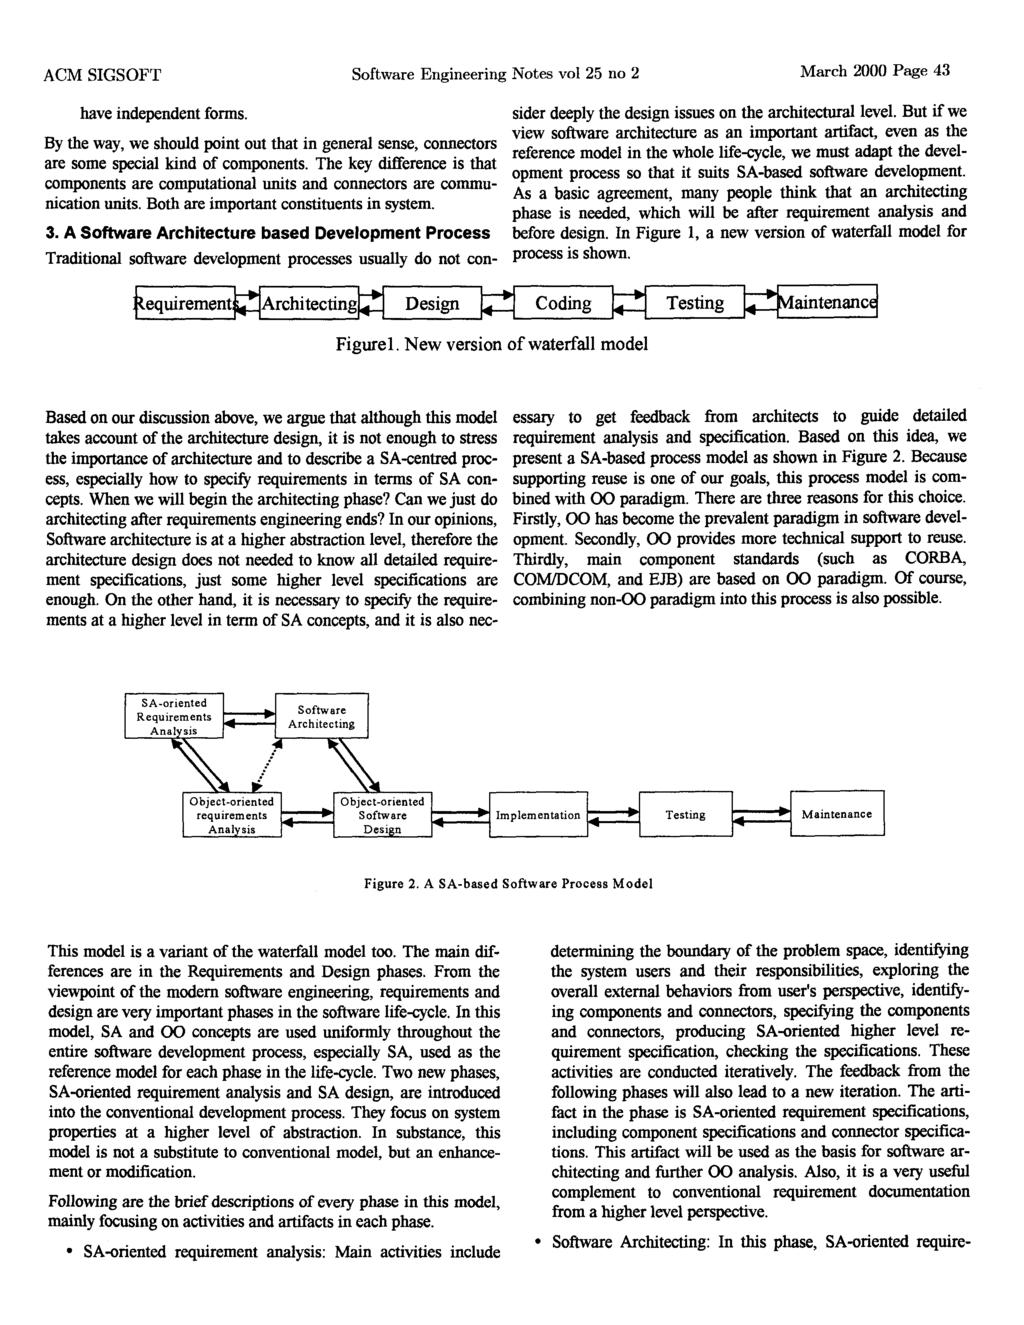 ACM SIGSOFT Software Engineering Notes vol 25 no 2 March 2000 Page 43 have independent forms. By the way, we should point out that in general sense, connectors are some special kind of components.